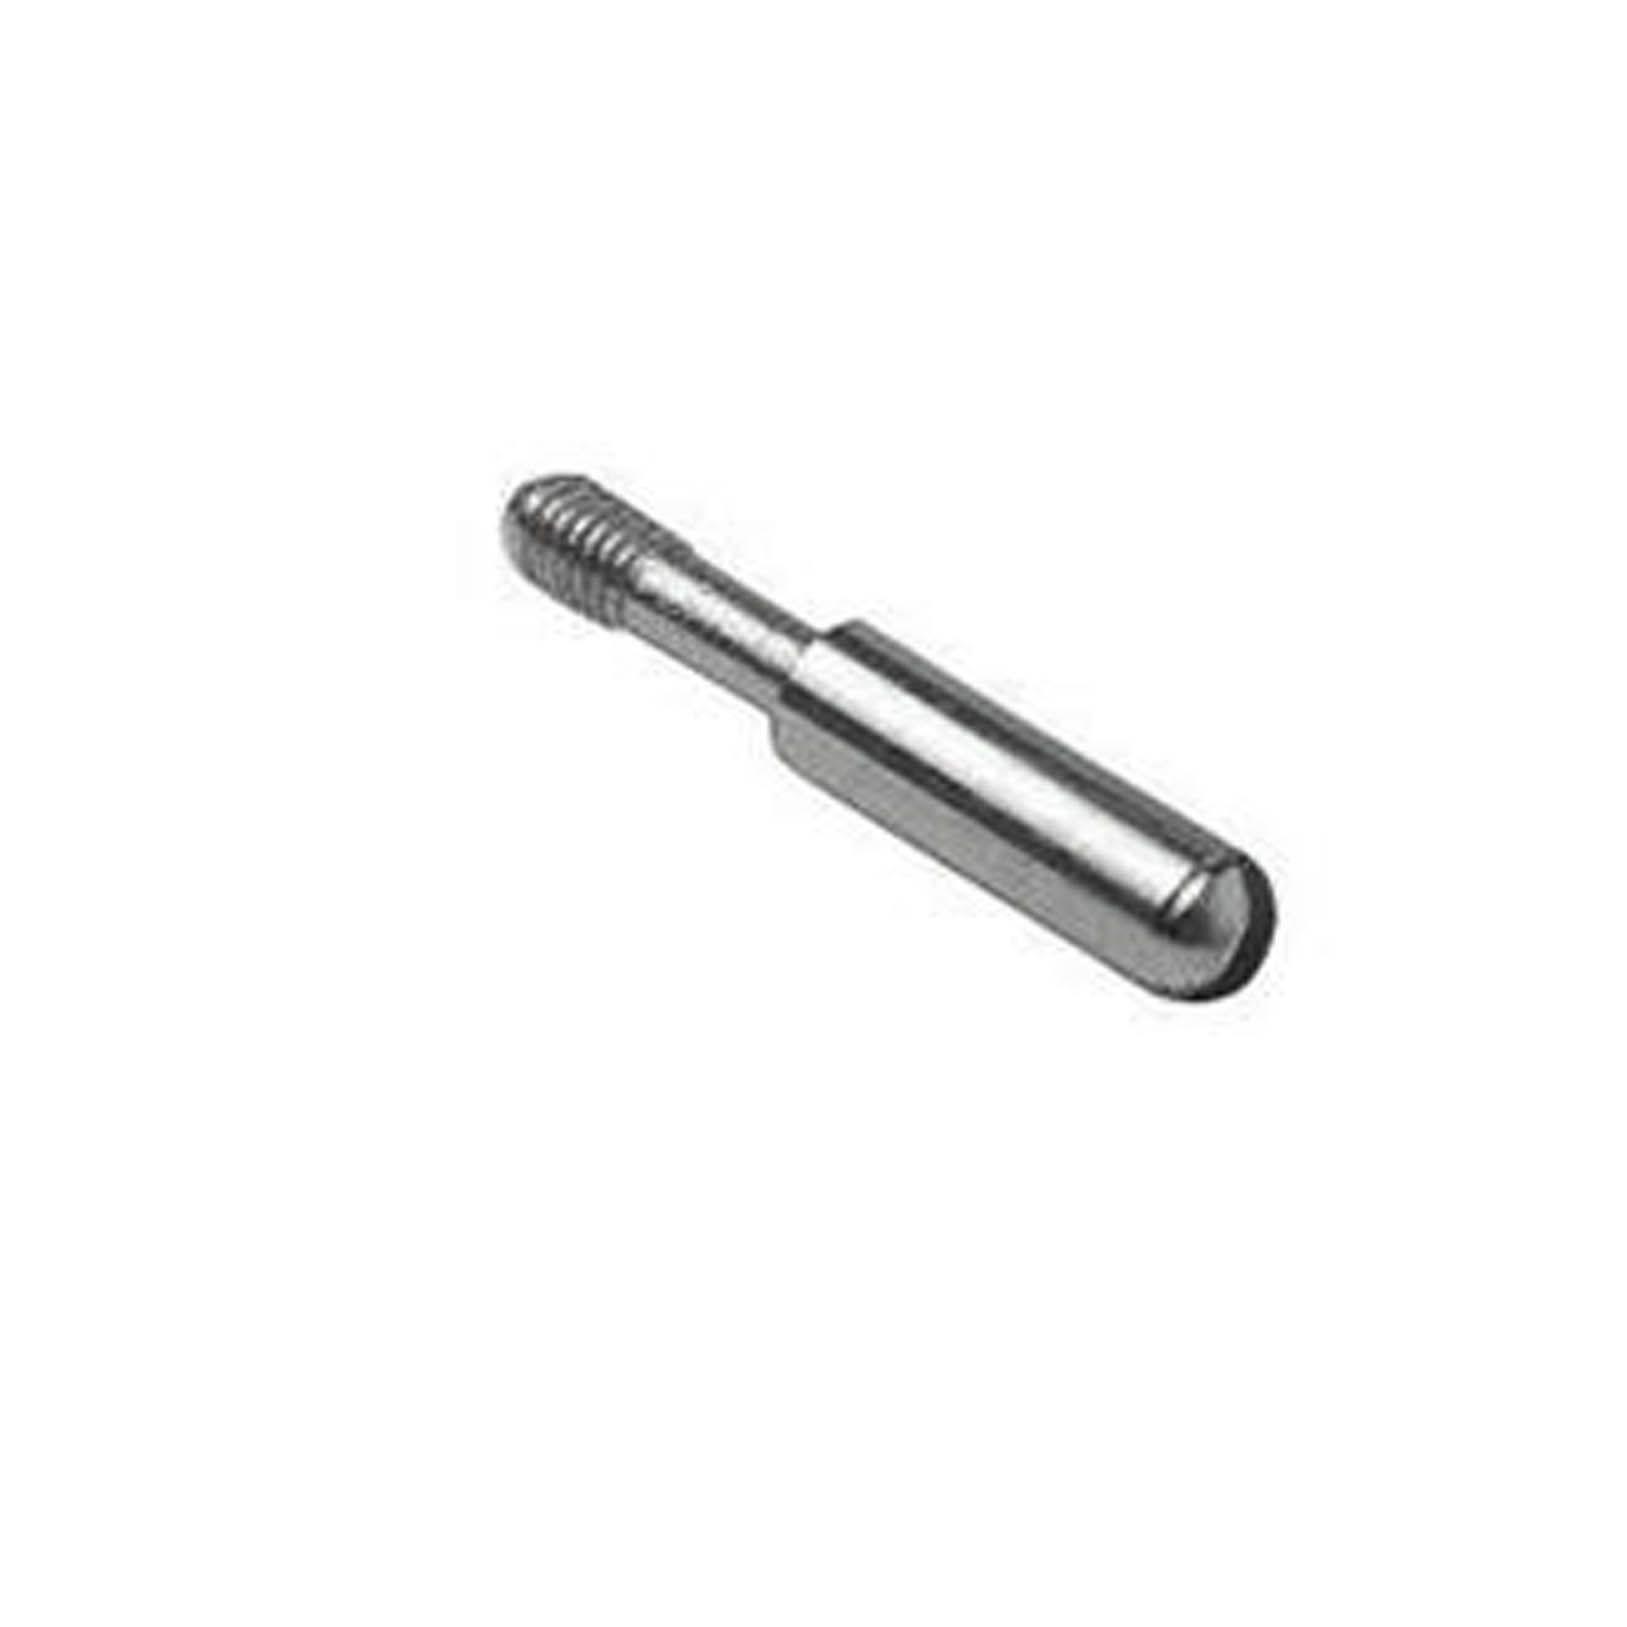 Mencom CRM-CX Stainless Steel Male Coding Pin for MIXO